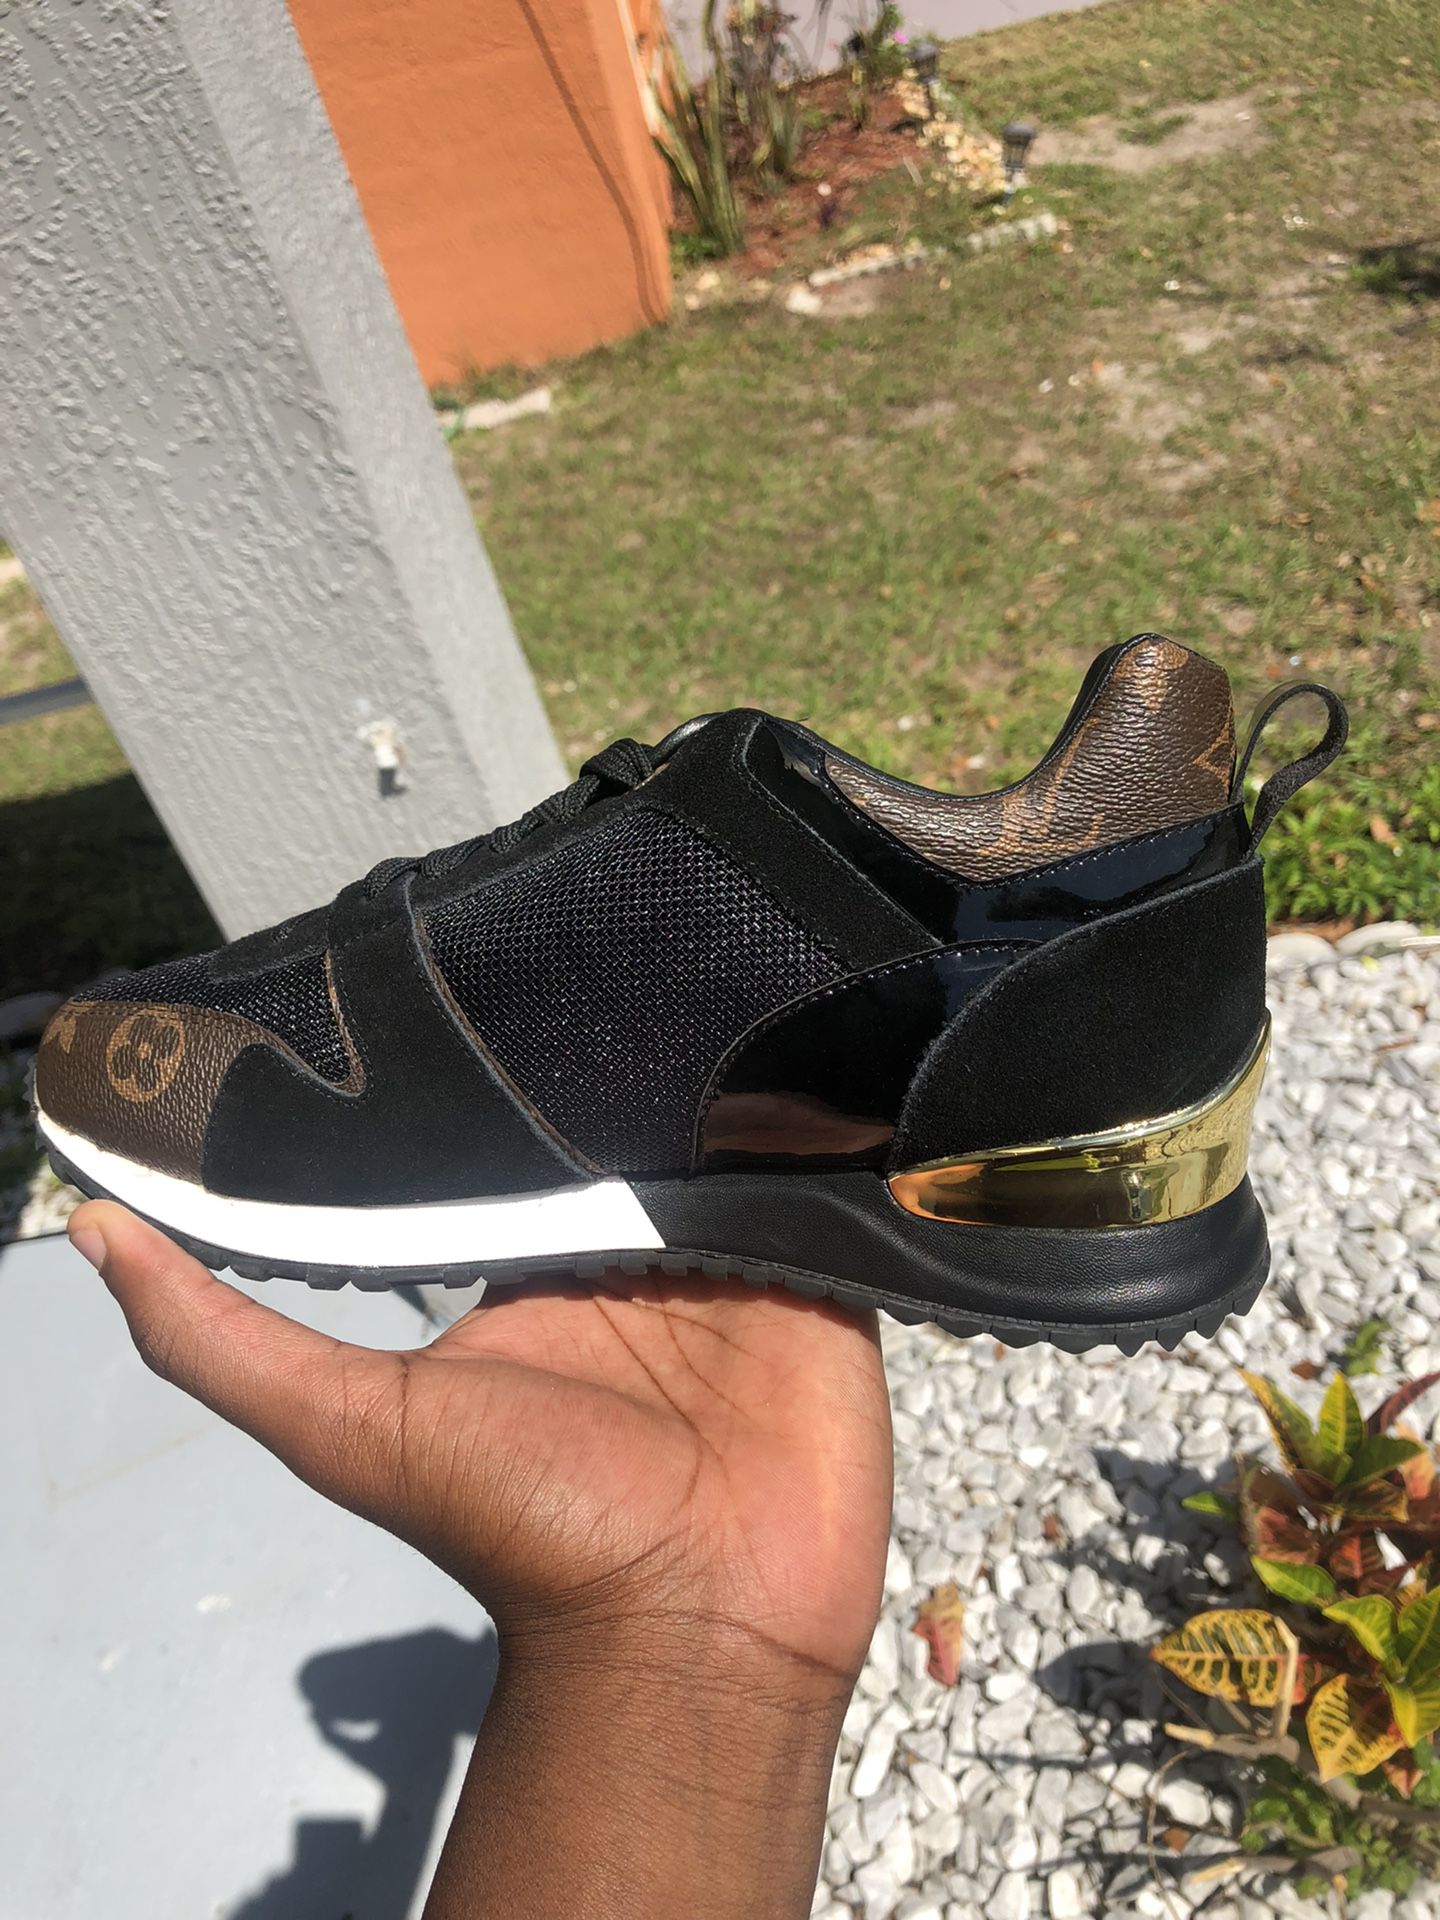 (No Box)Louis Vuitton Sneakers #54 (Size 8.5) for Sale in Quail Heights, FL  - OfferUp